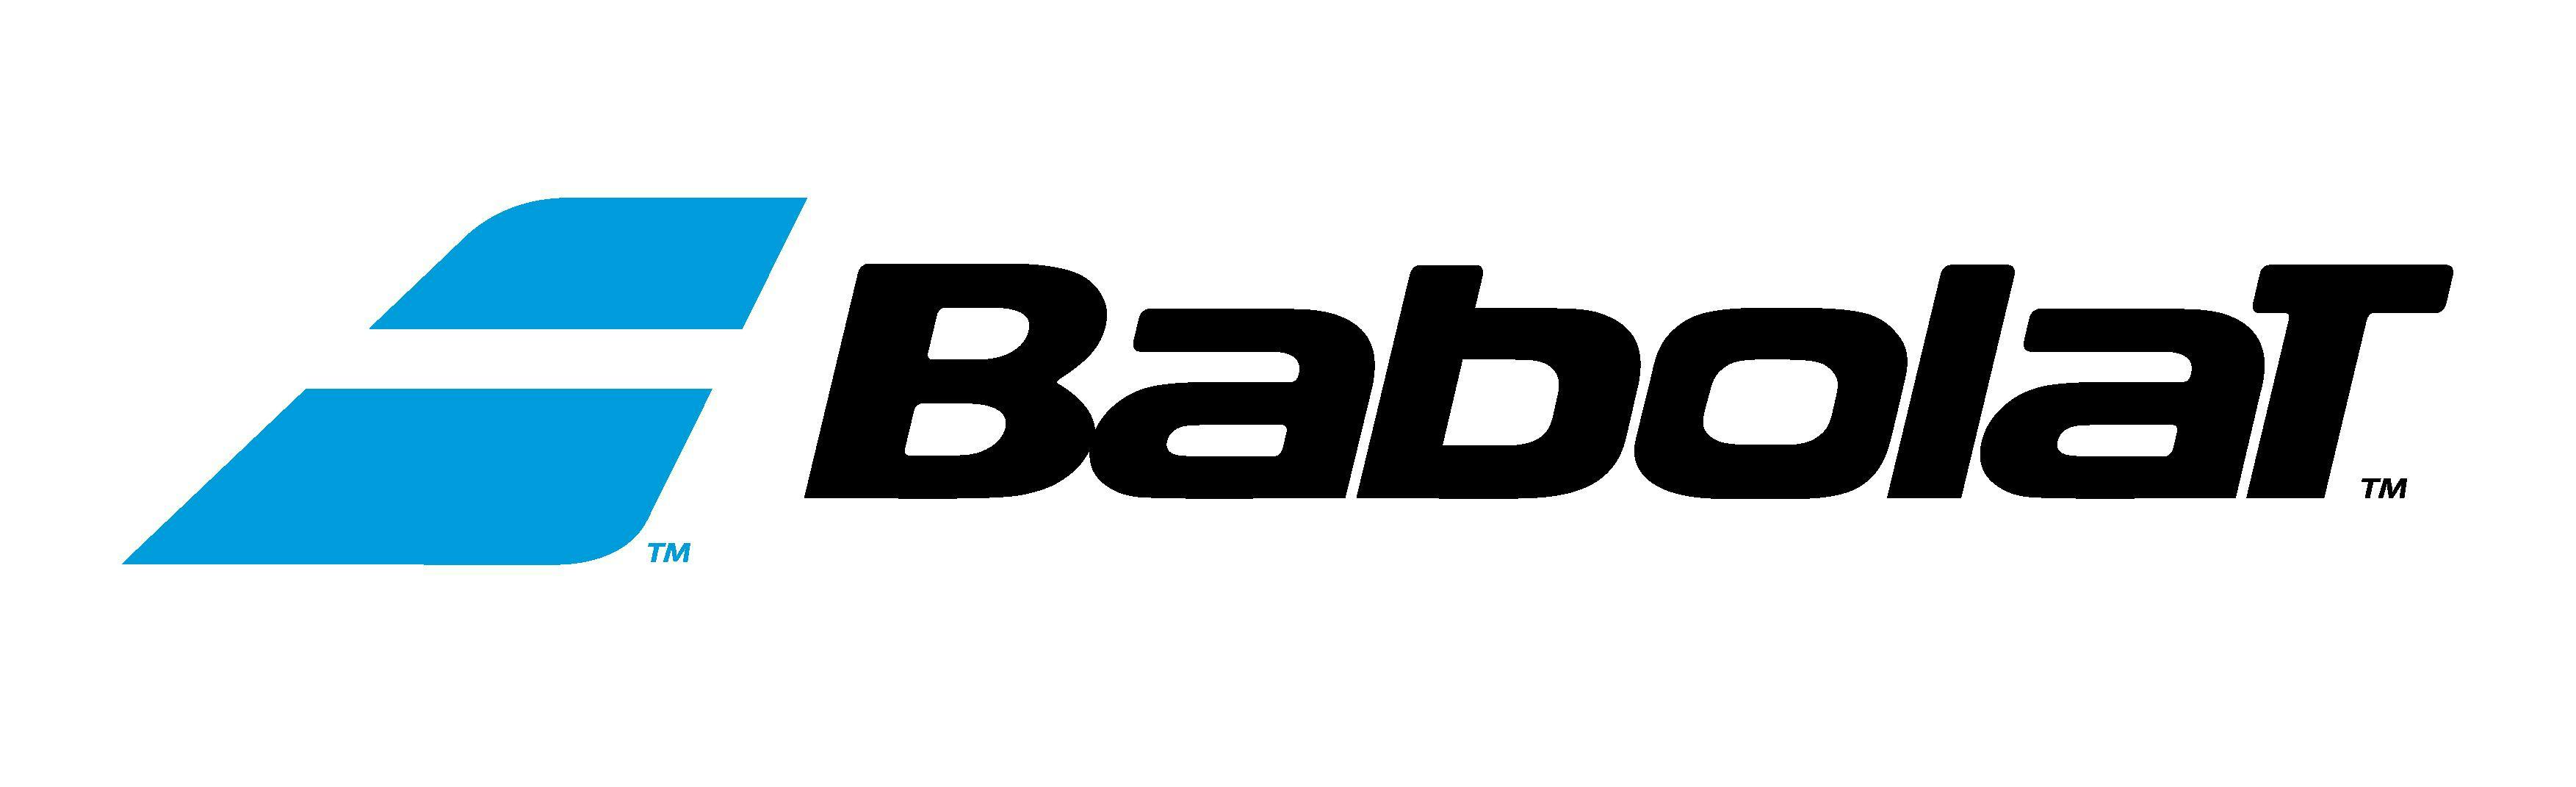 The Babolat label says "Babolat" in black next to a light blue shape.